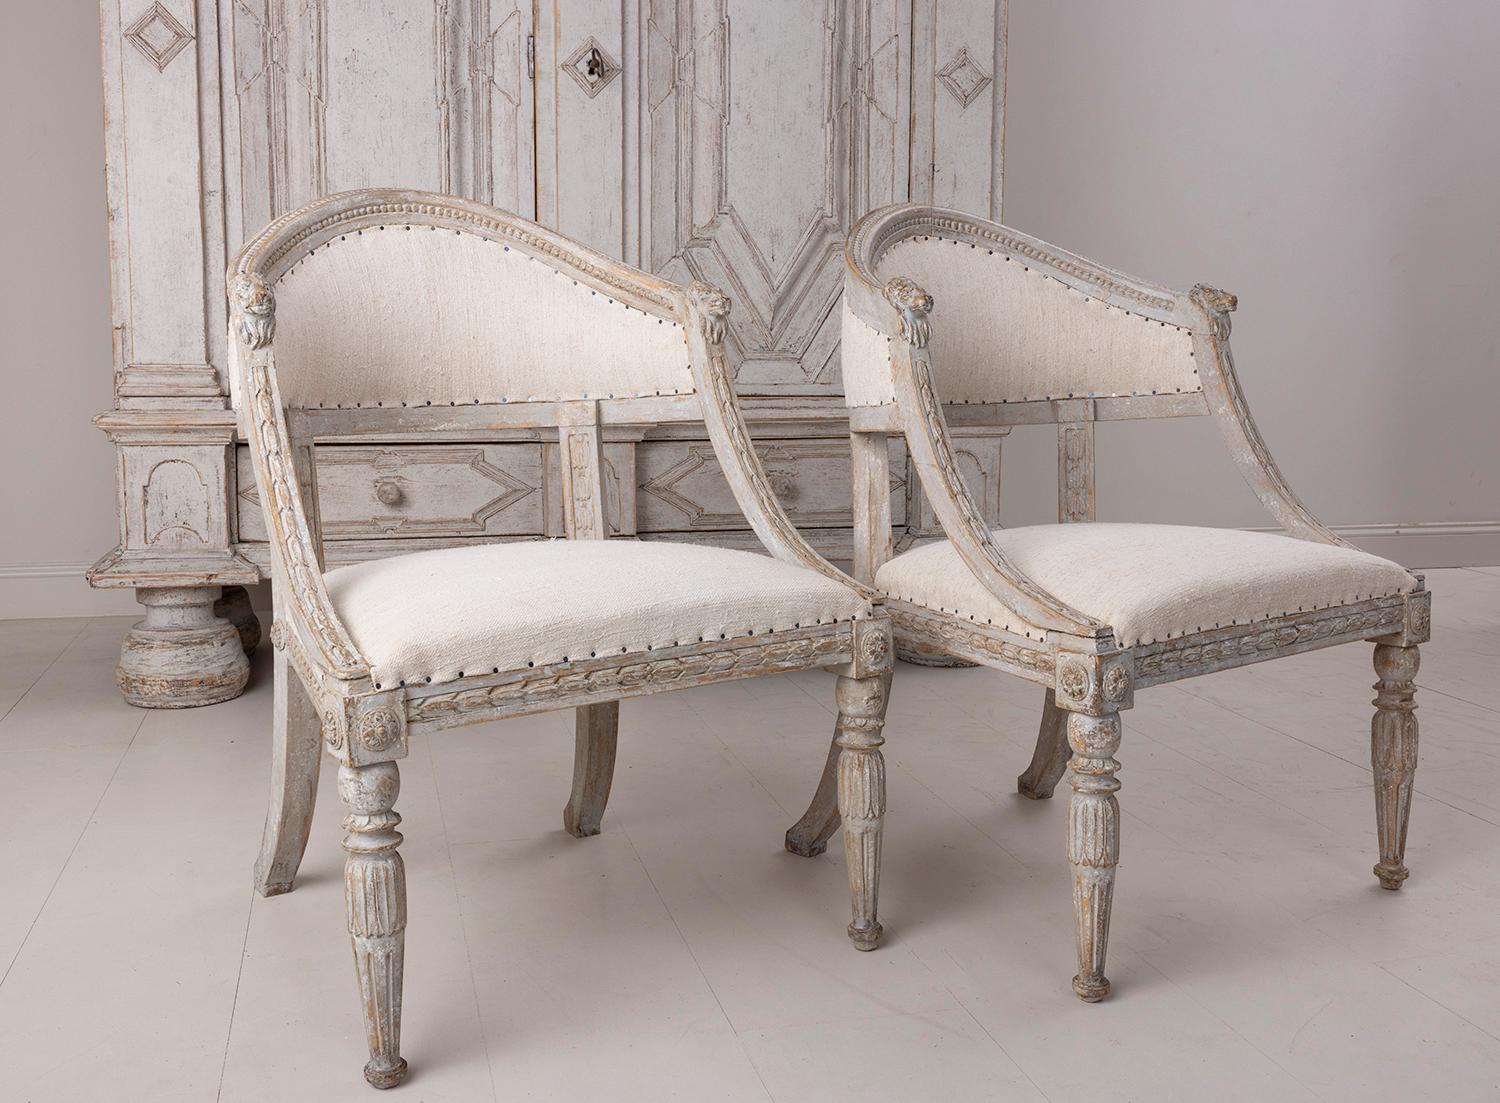 A Swedish late Gustavian pair of antique barrel back armchairs. These stunning chairs have shaped barrel backs with lion head carvings.  The frame features carved bell flowers with front legs adorned with lotus flowers and rosettes. This pair has